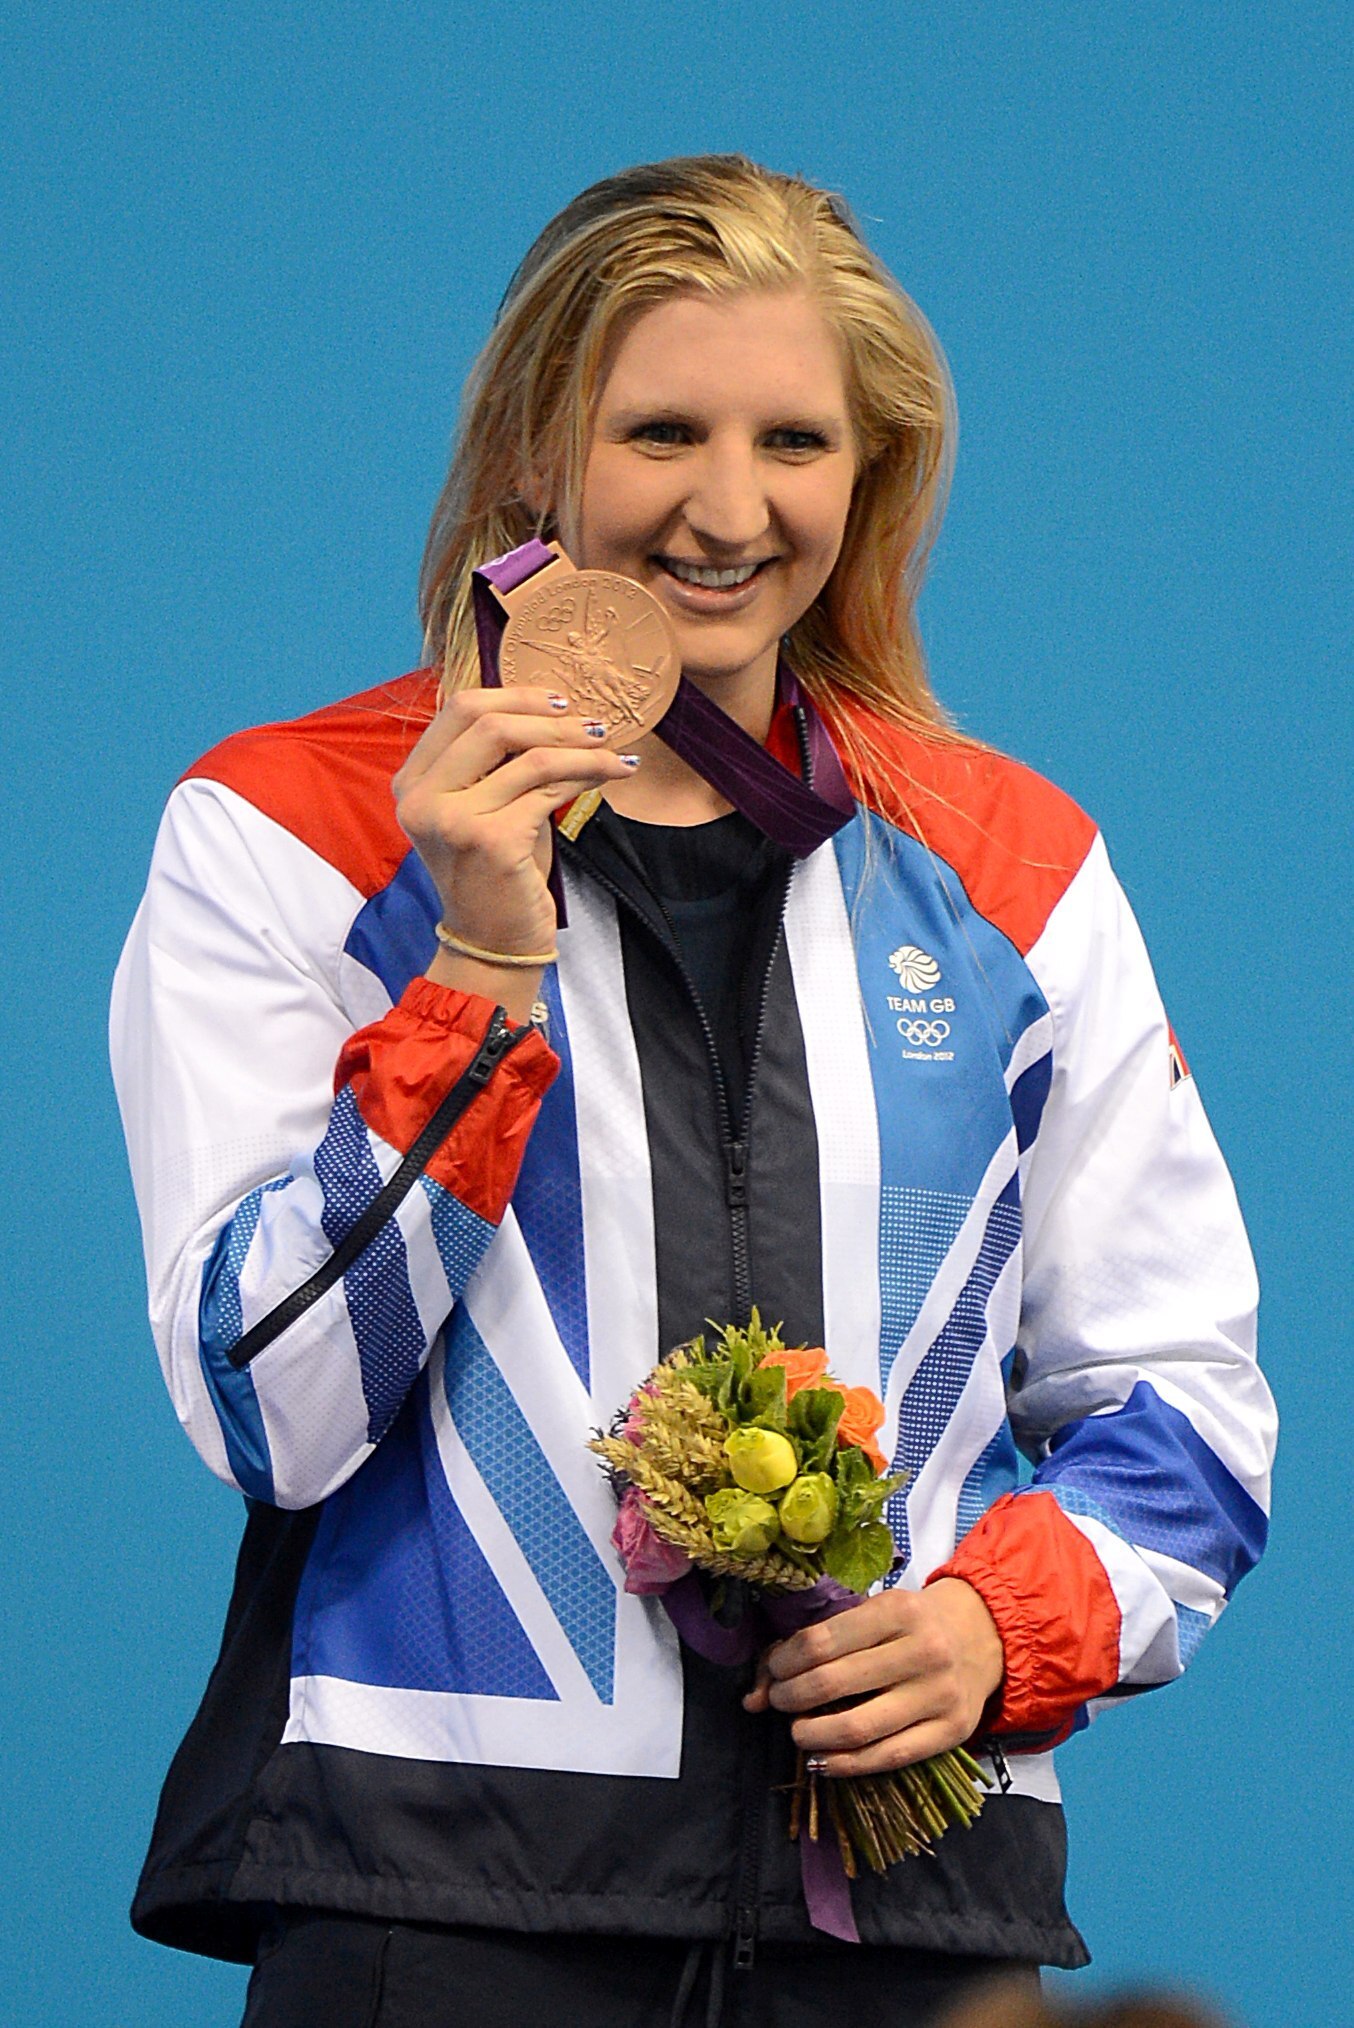 Becky Adlington with a bronze medal at the London 2012 Olympics